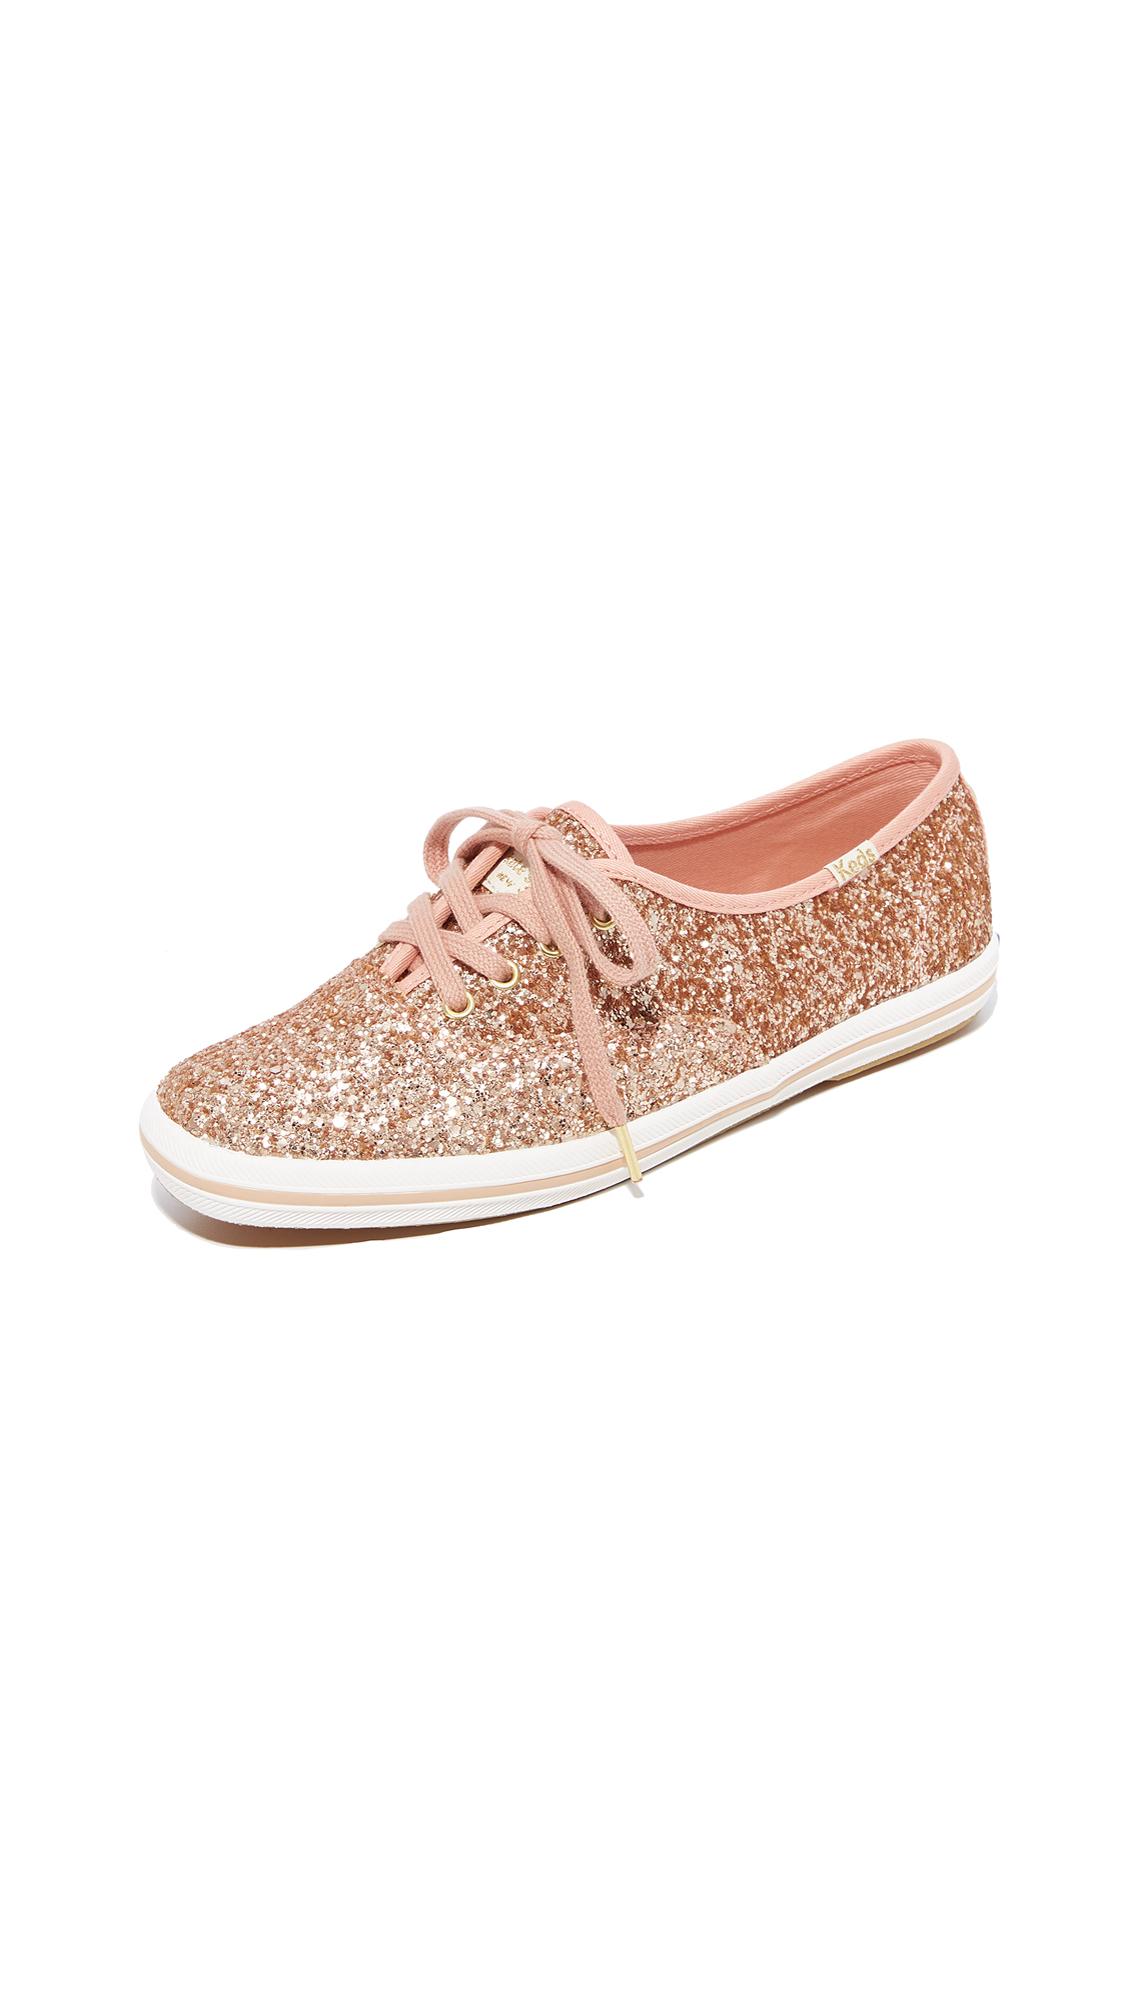 Keds Canvas X Kate Spade New York Glitter Sneakers in Rose Gold 